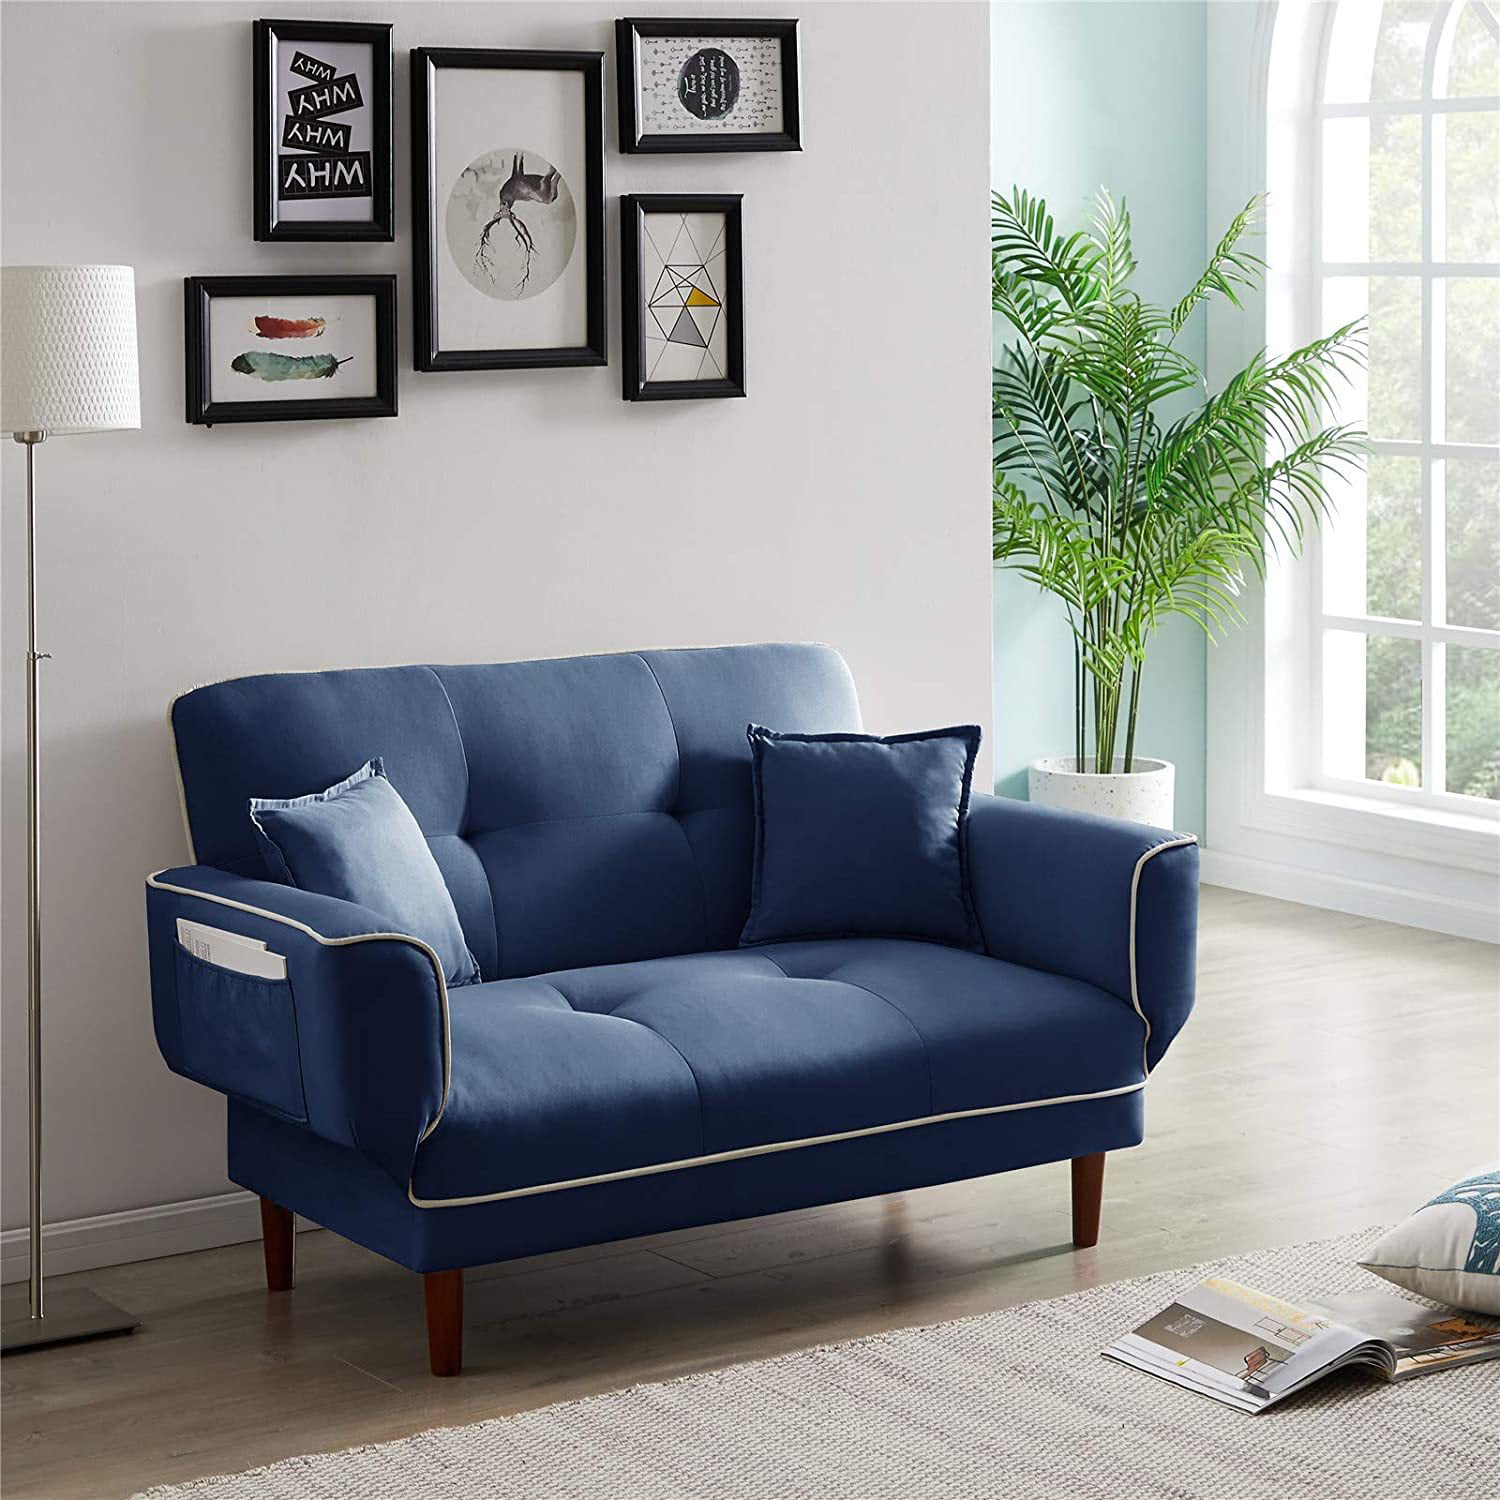 Small Couch for Small Spaces Grey Velvet Loveseat Sofa Bed with Storage Pocket and 2 Throw Pillows SURFLINE Pull Out Couch Sleeper Sofa Bed Loveseat Sleeper with Memory Foam Mattress Twin